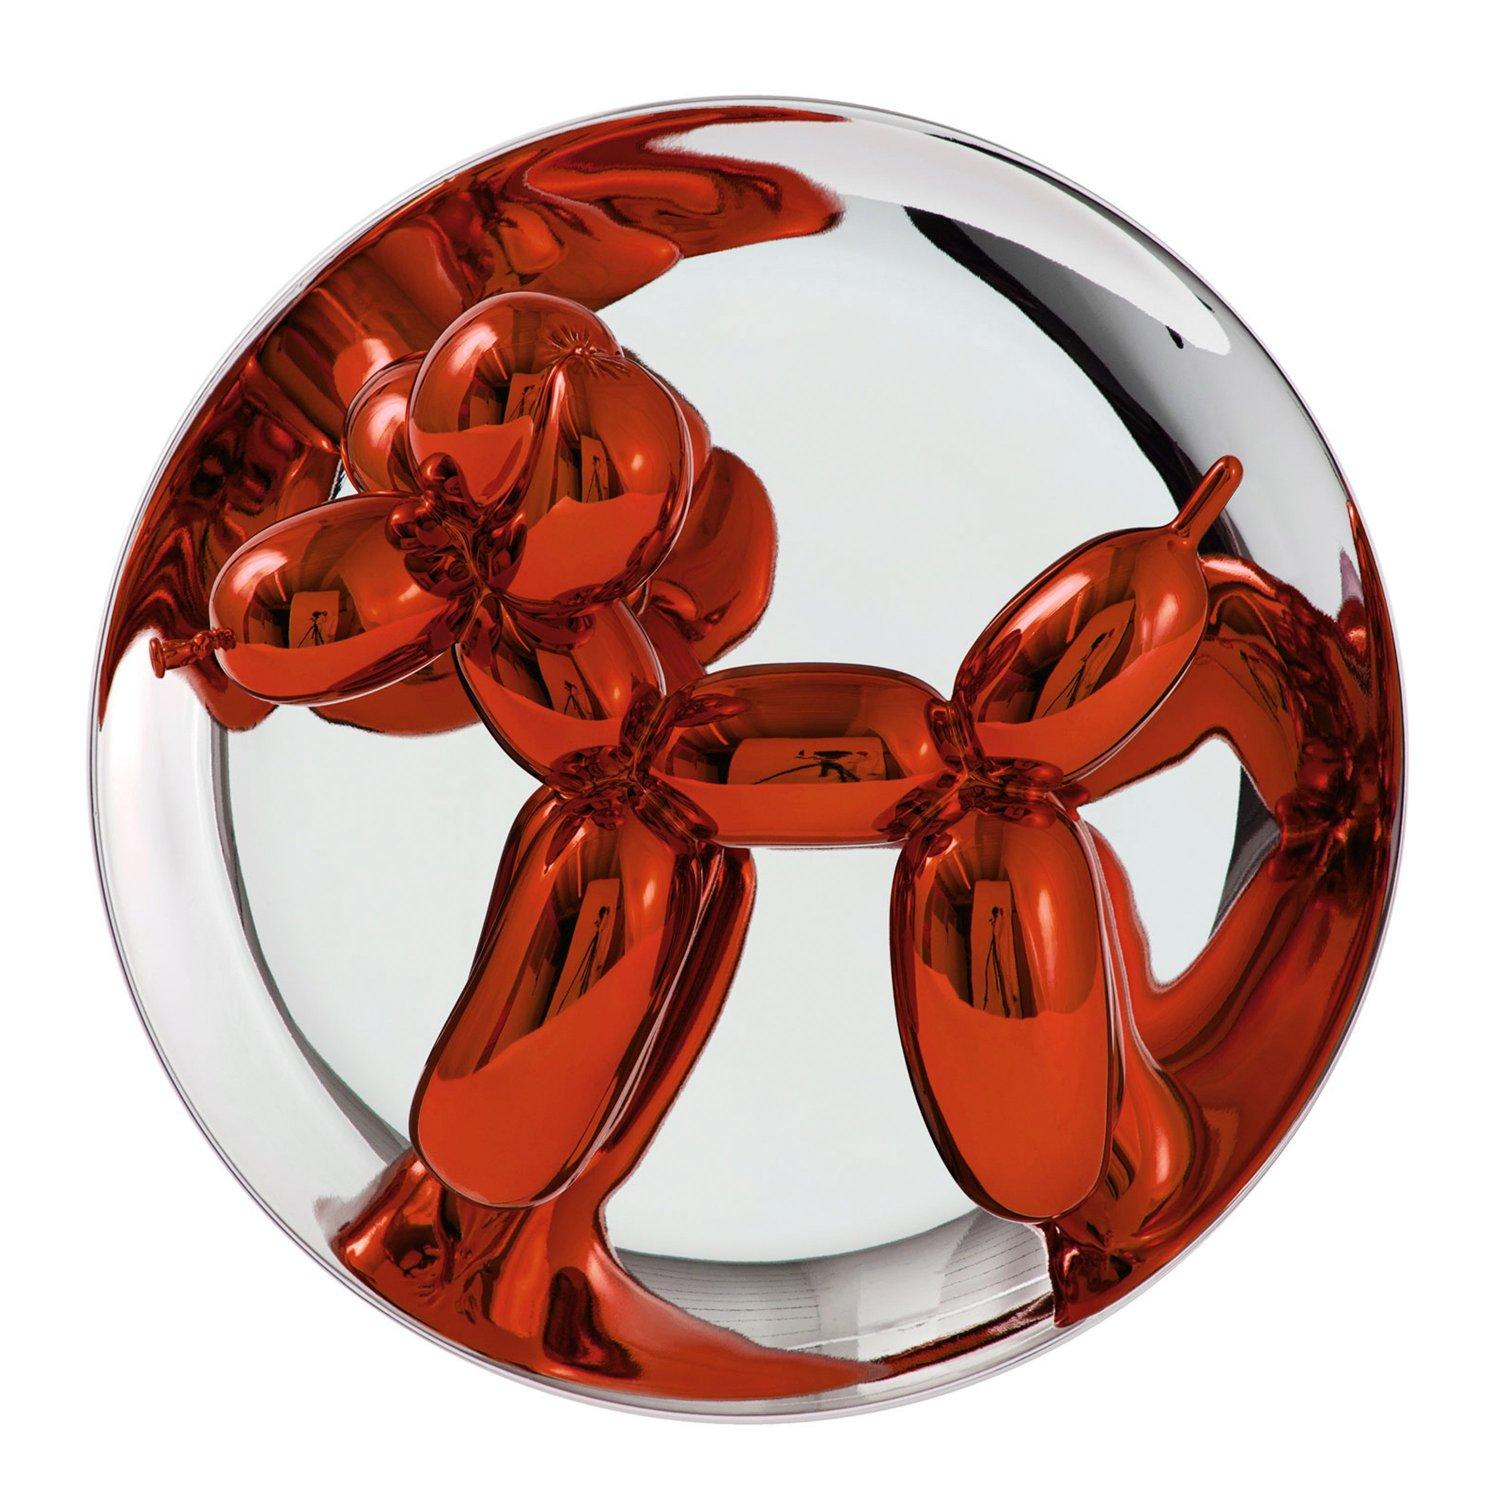 Balloon Dog (Orange) - Jeff Koons, Contemporary, 21st Century, Sculpture, Decor, Limited Edition

Limoges porcelain with chromatic metalized coating
Edition of 2300
Signed and numbered
In mint condition, as acquired from the manufacturer
In the